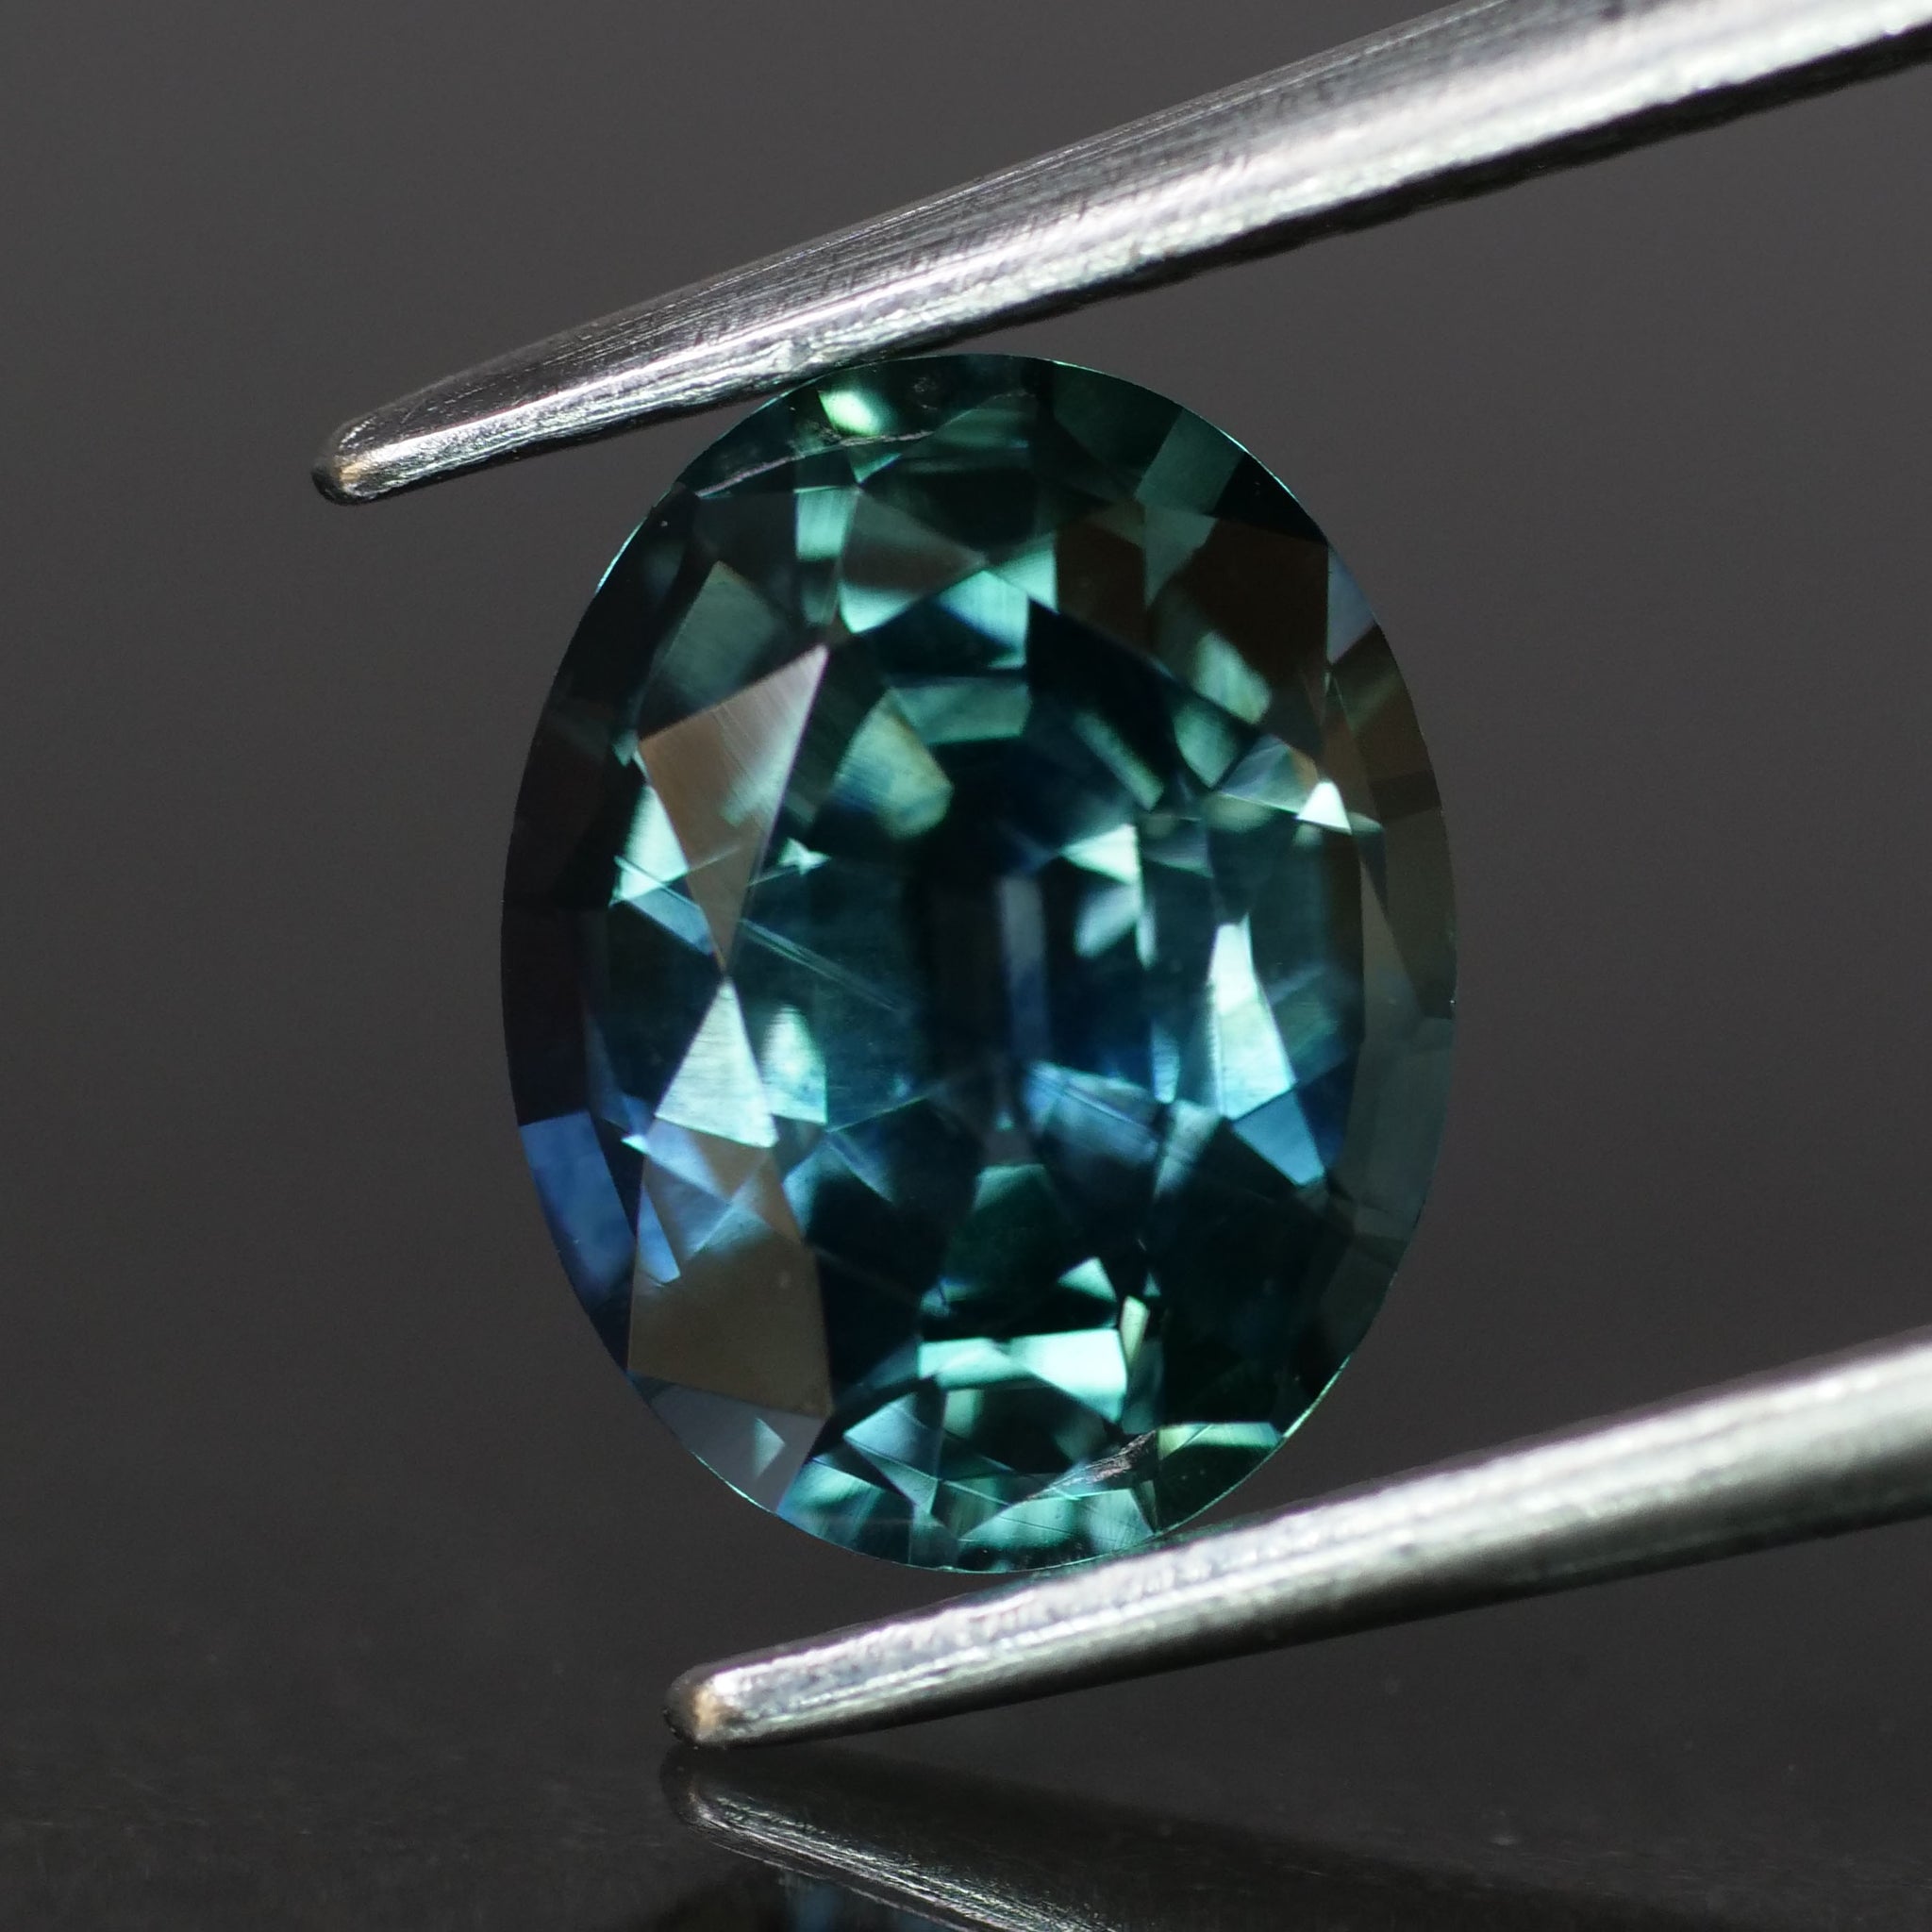 Sapphire | natural, teal color, oval cut *8x6.5 mm, 1.9ct - Eden Garden Jewelry™